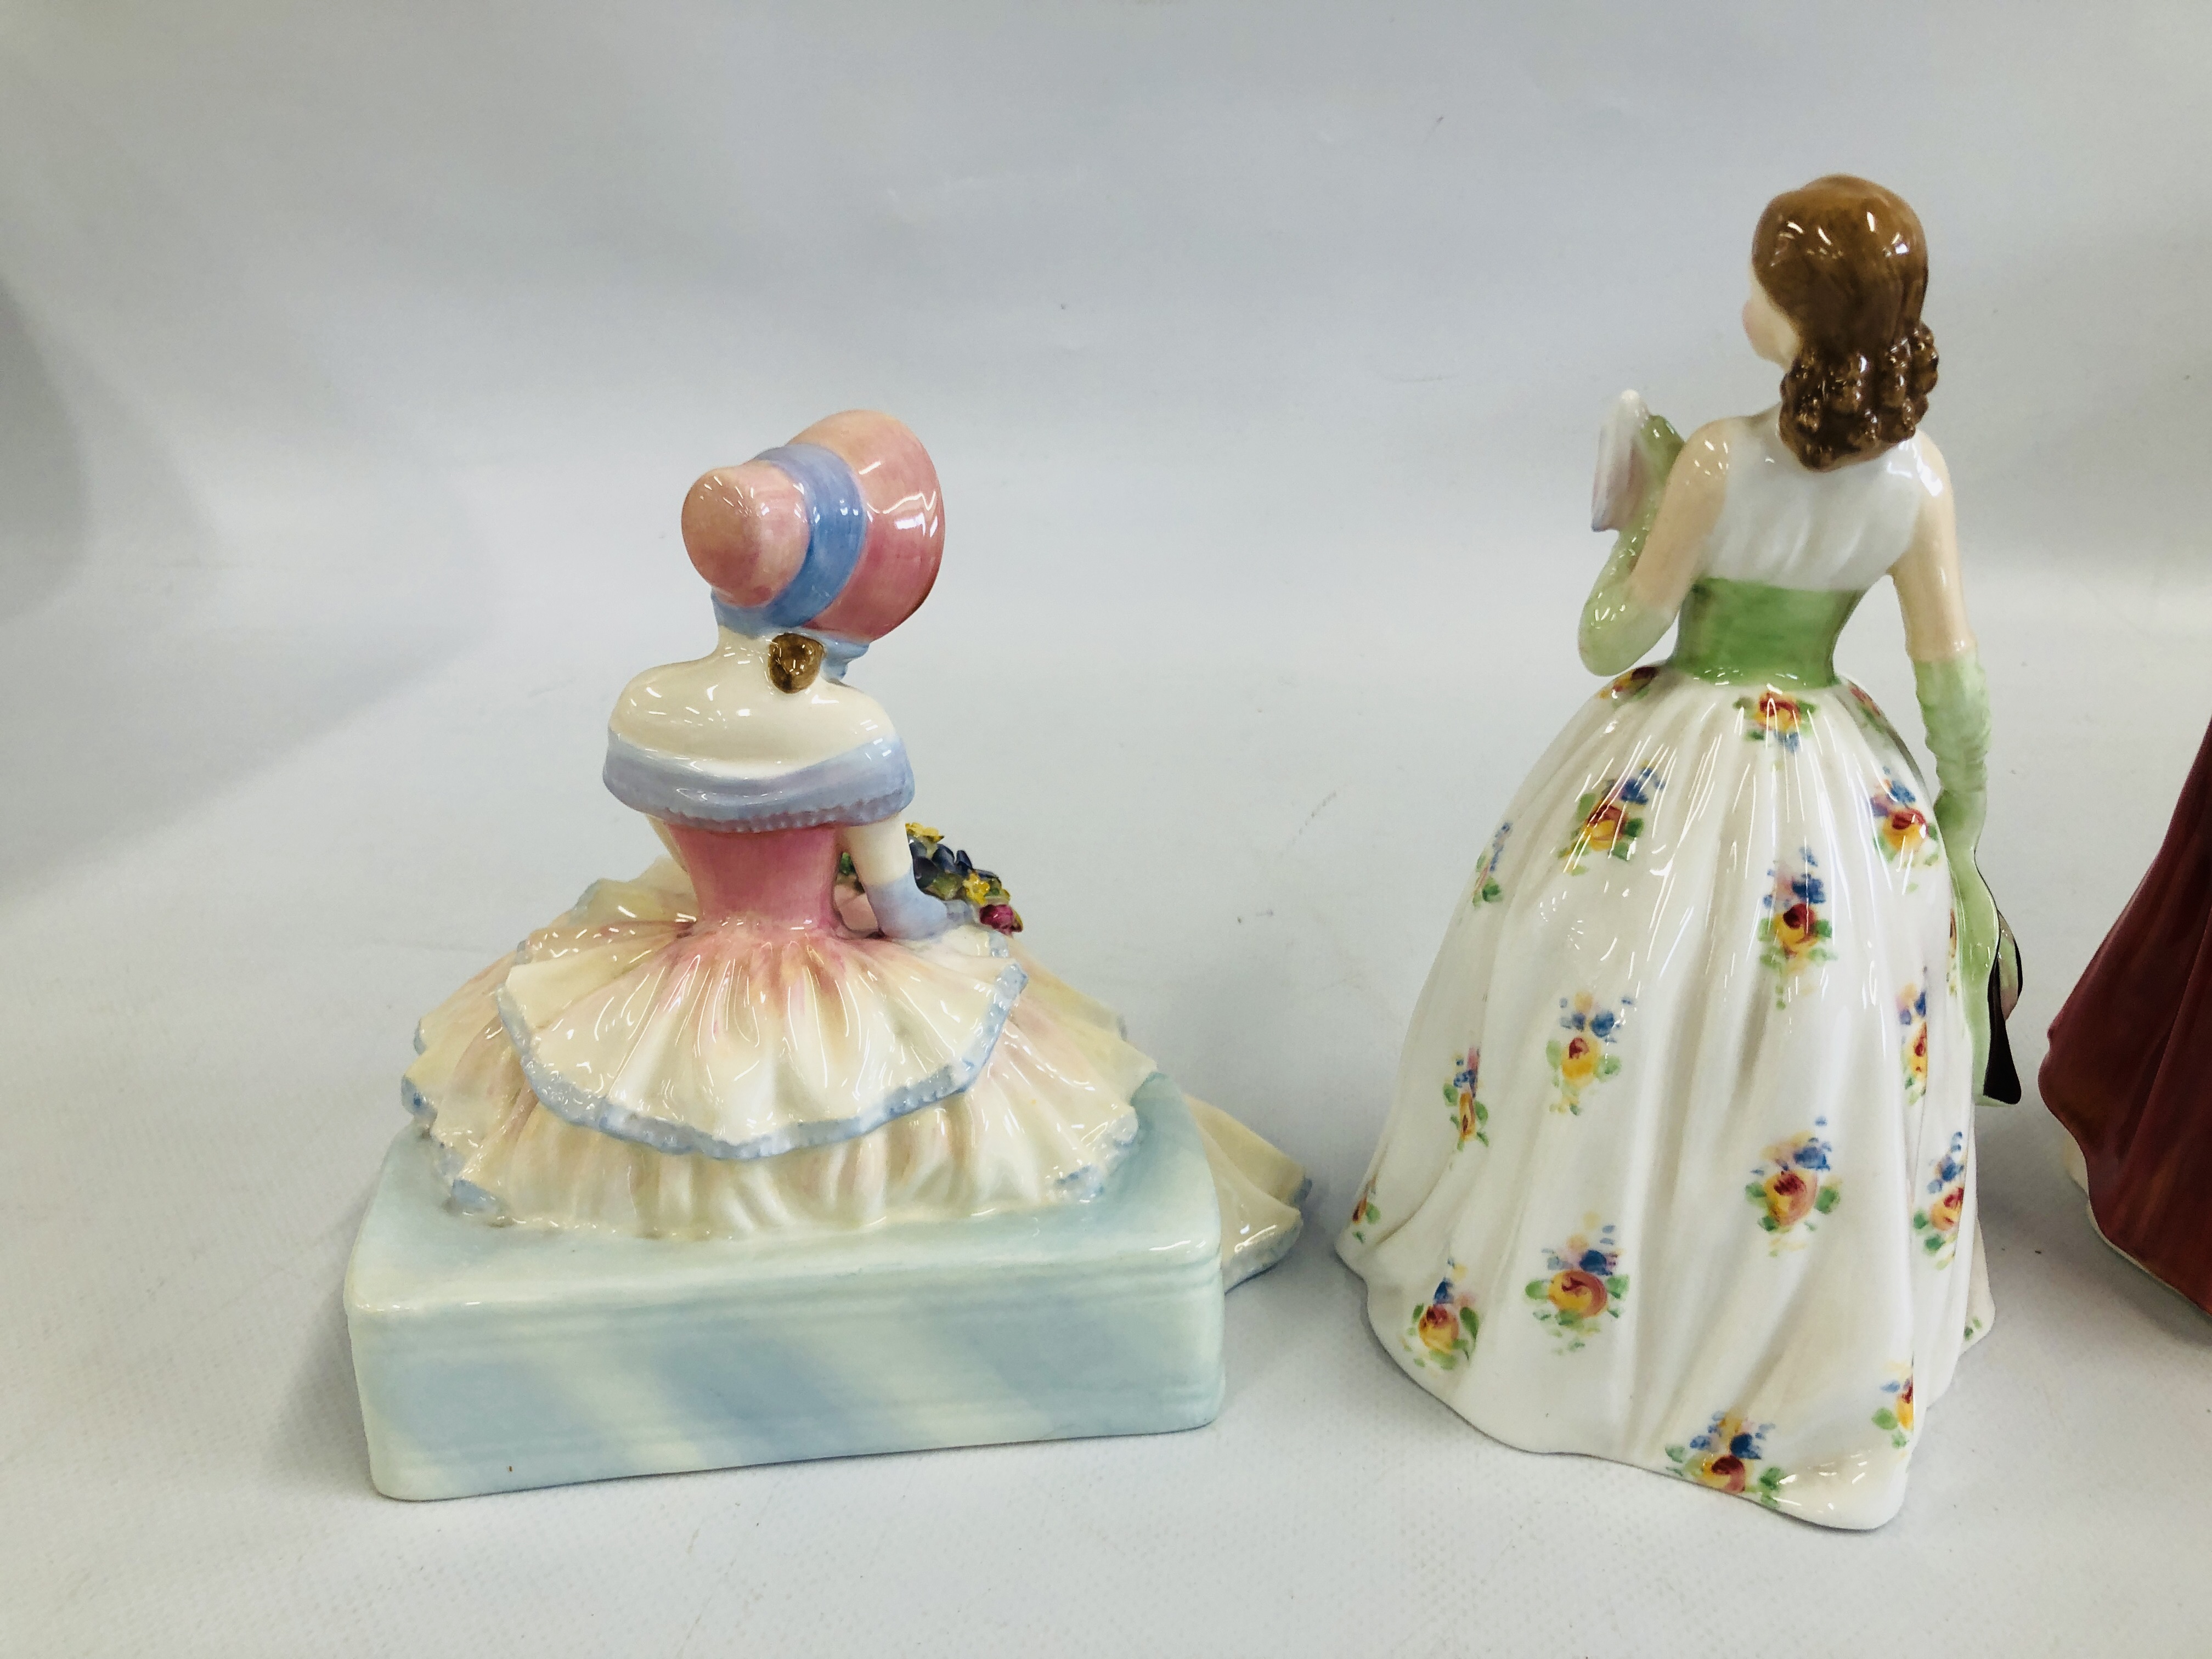 THREE ROYAL DOULTON PORCELAIN COLLECTORS FIGURES "CAROLYN" & "BESS" & "DAYDREAMS". - Image 8 of 9